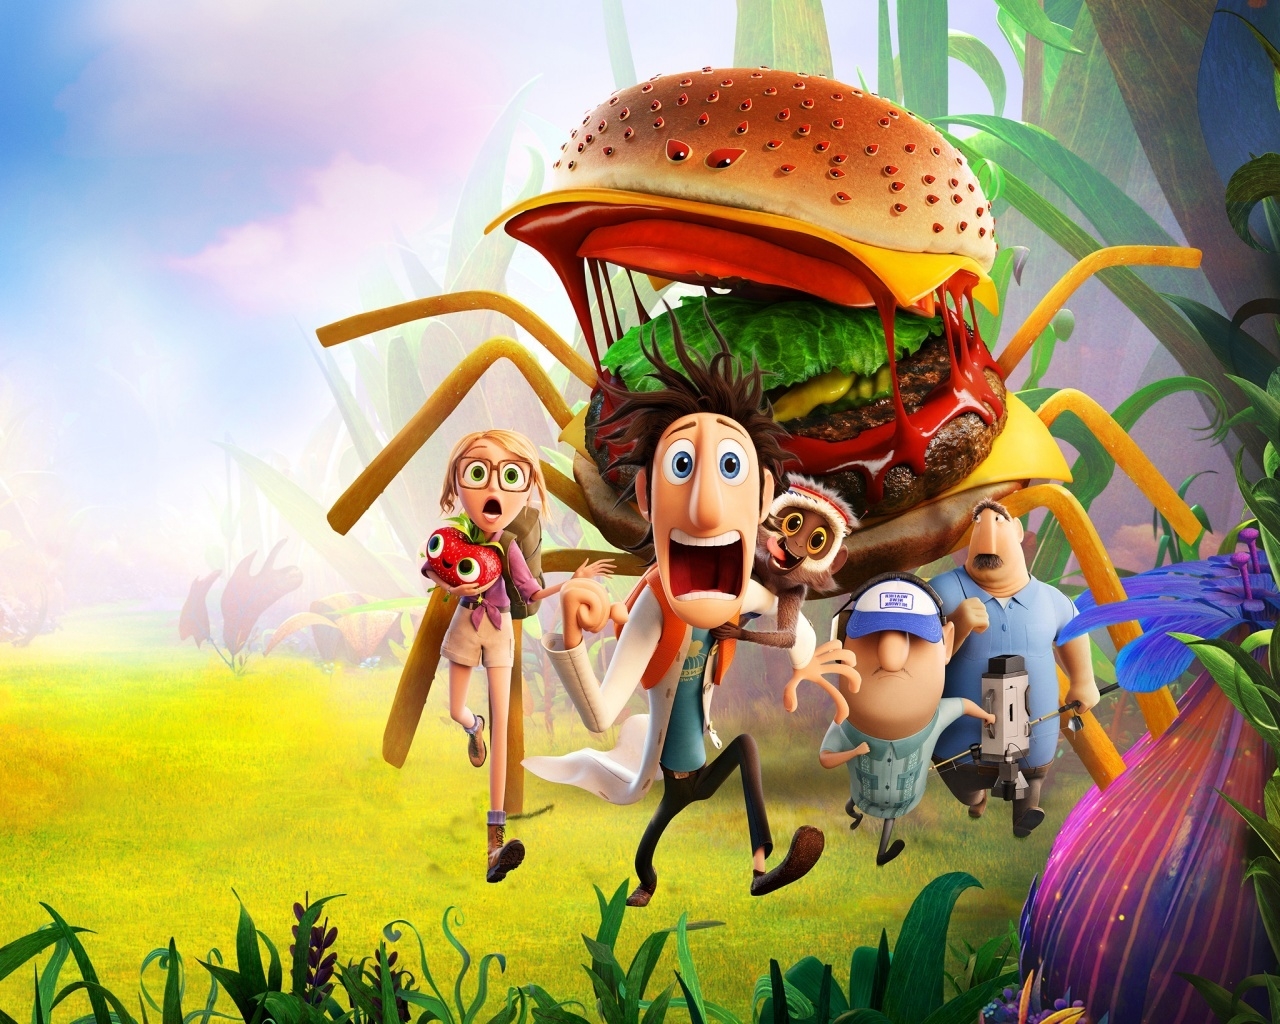 Cloudy with a chance of Meatballs for 1280 x 1024 resolution